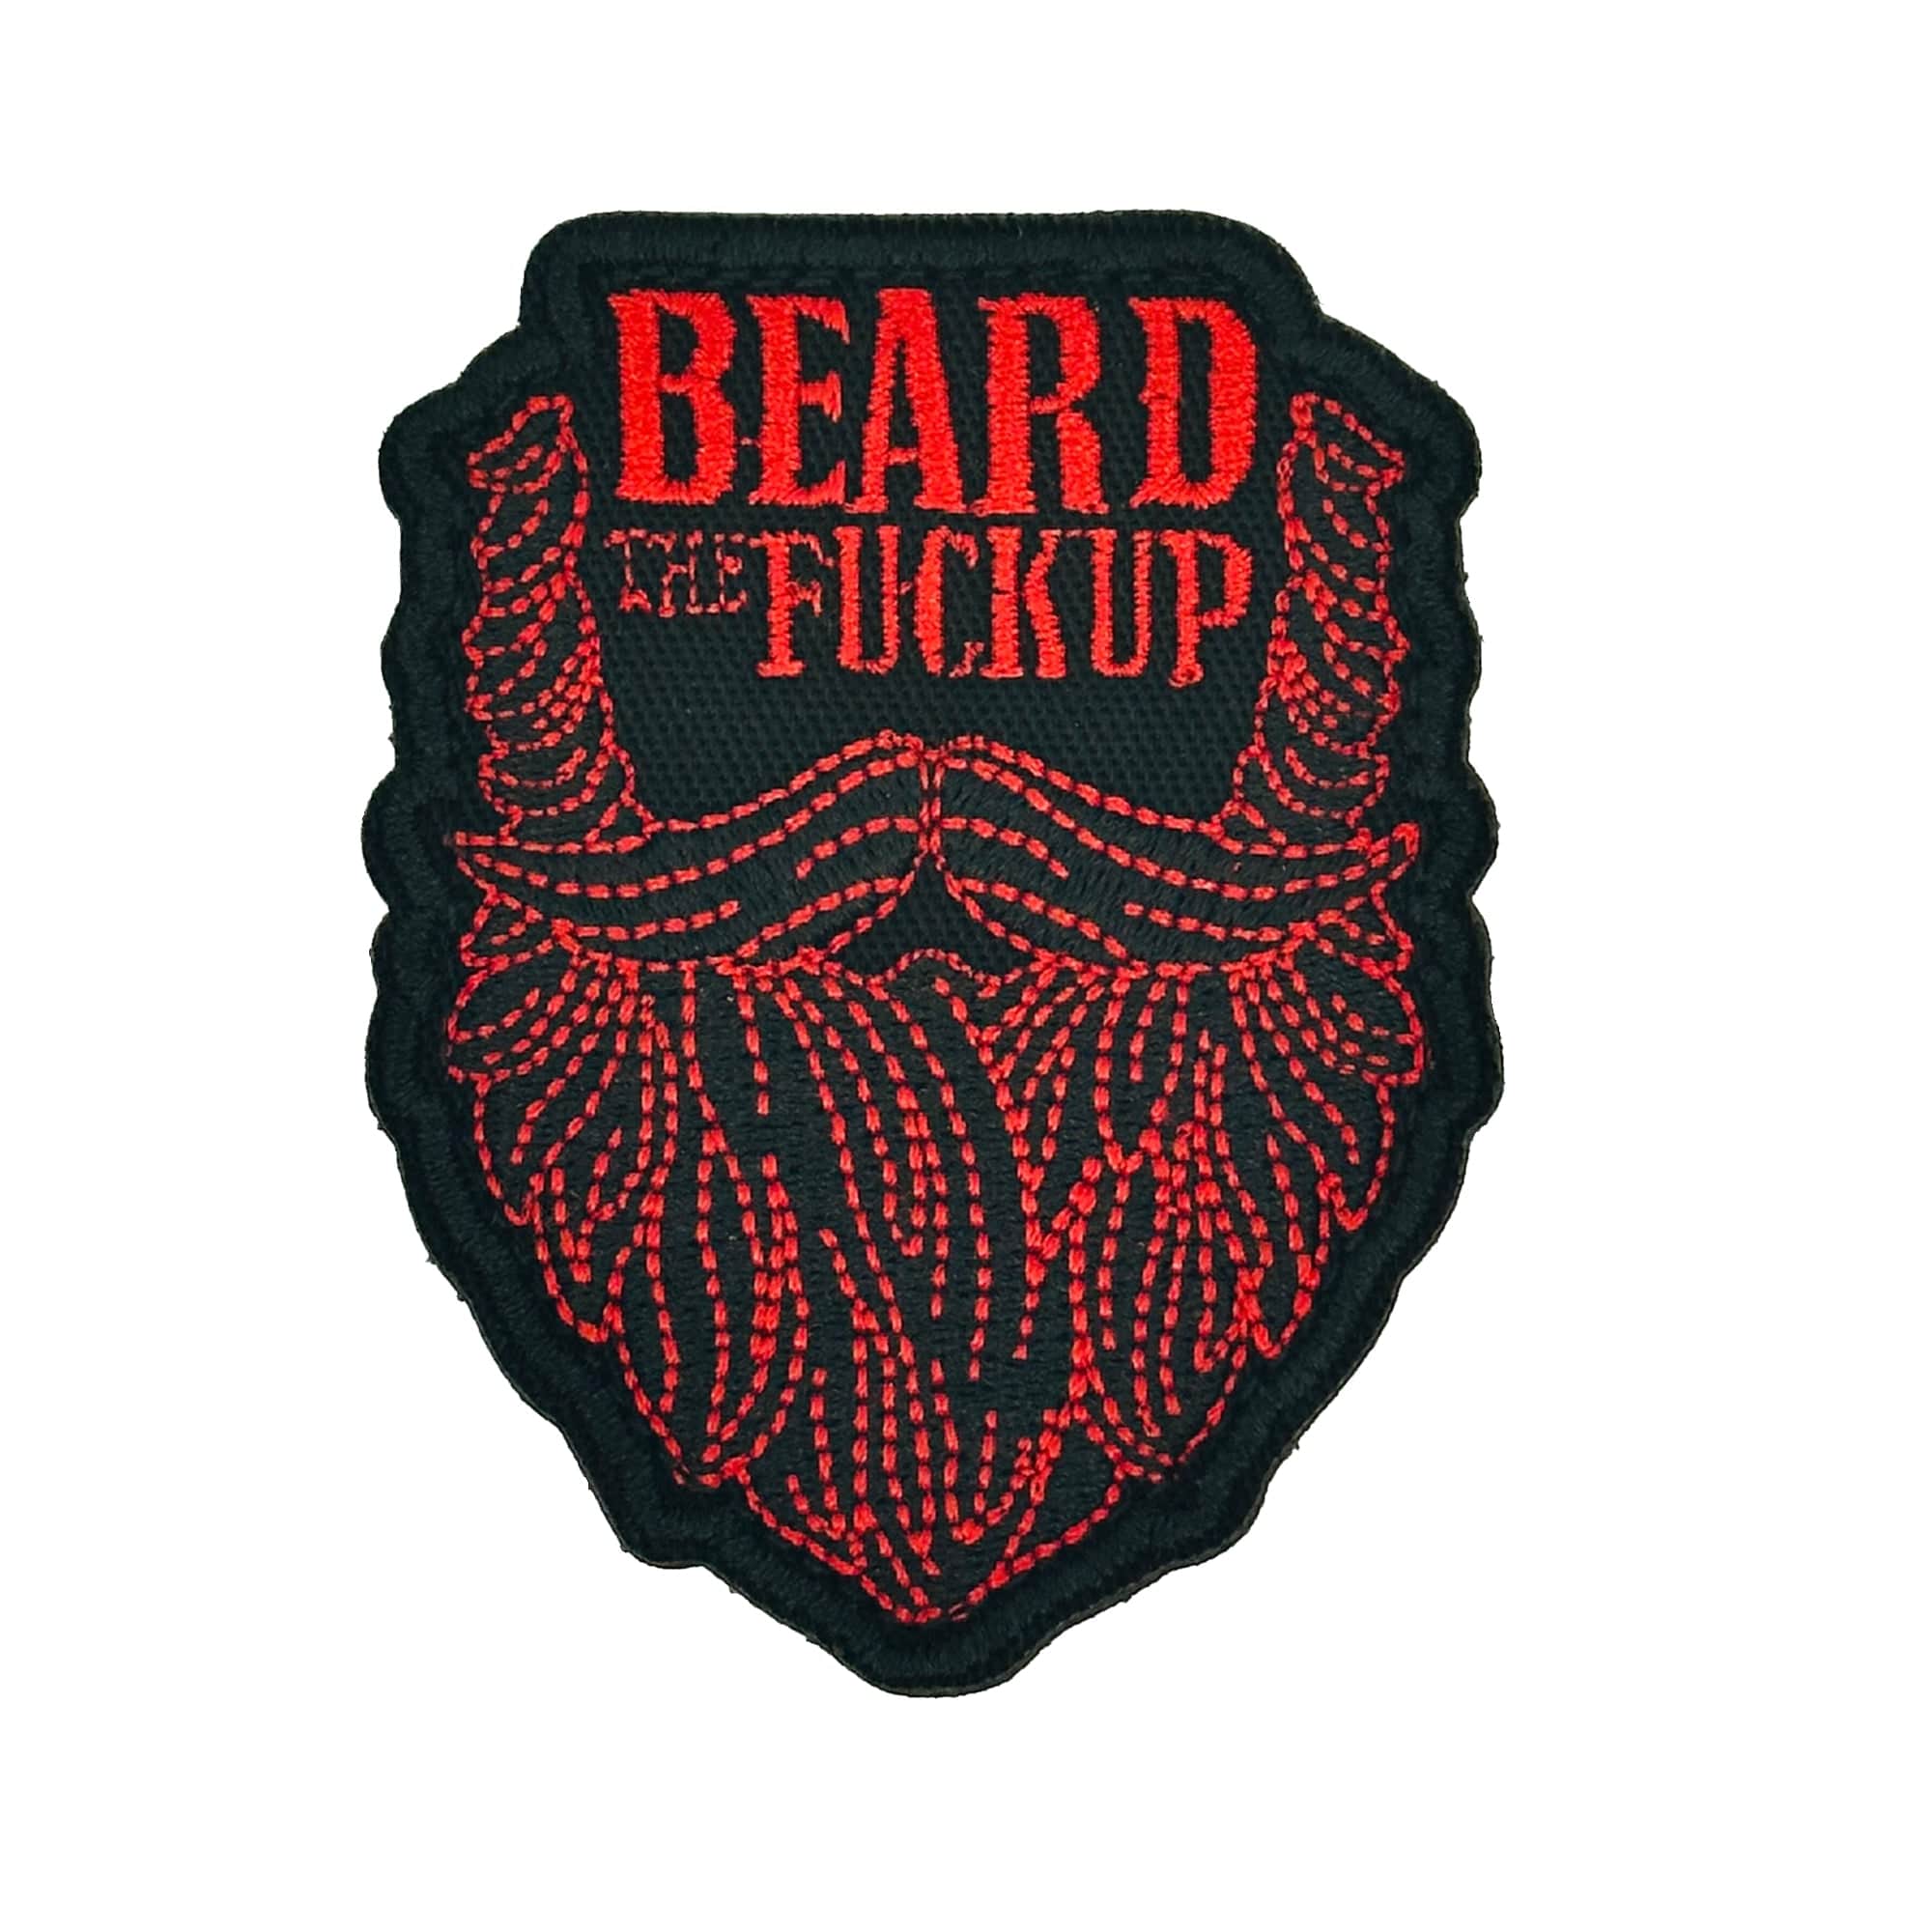 Tactical Gear Junkie Patches Black w/Red Beard the Fuck Up - 3" Laser Cut Patch